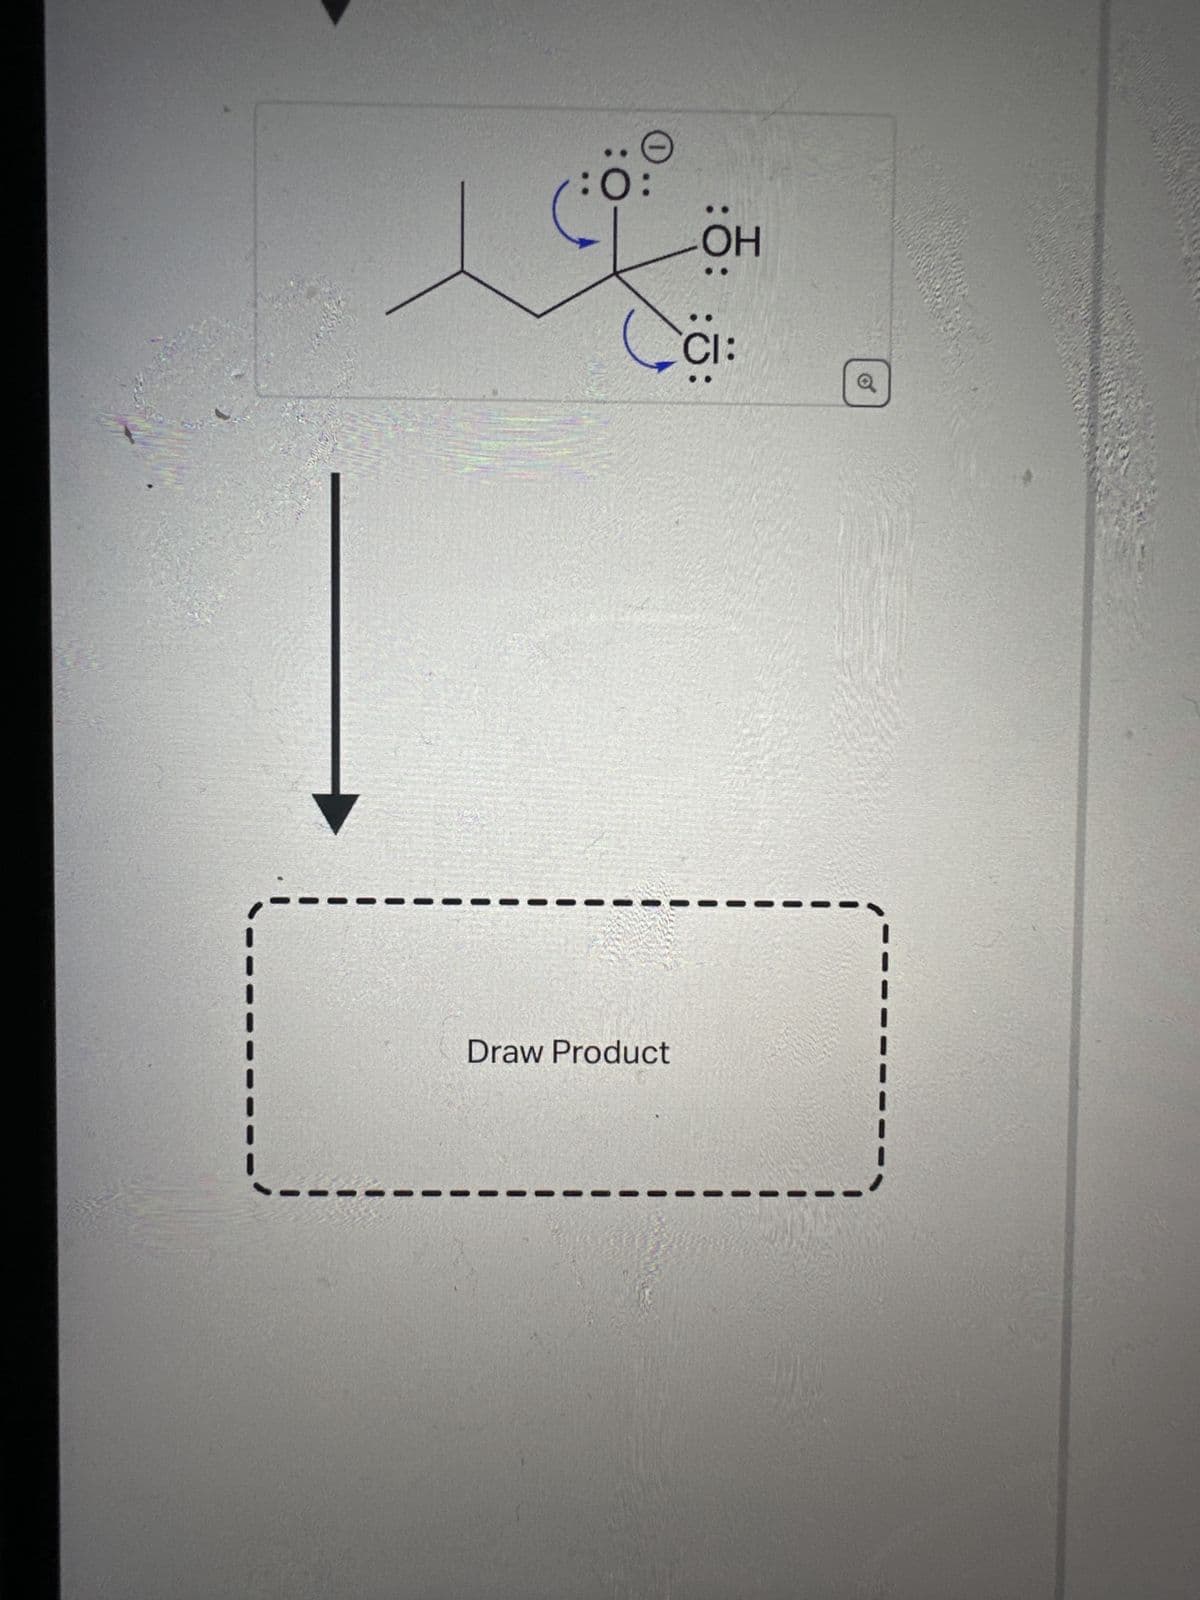 Curved arrows are used to illustrate the flow of
electrons. Follow the arrows and draw the starting
material and product in this reaction.
Include all lone pairs. Ignore stereochemistry.
Ignore inorganic byproducts.
Draw Reactant
NaOH
:0
OH
CI:
o